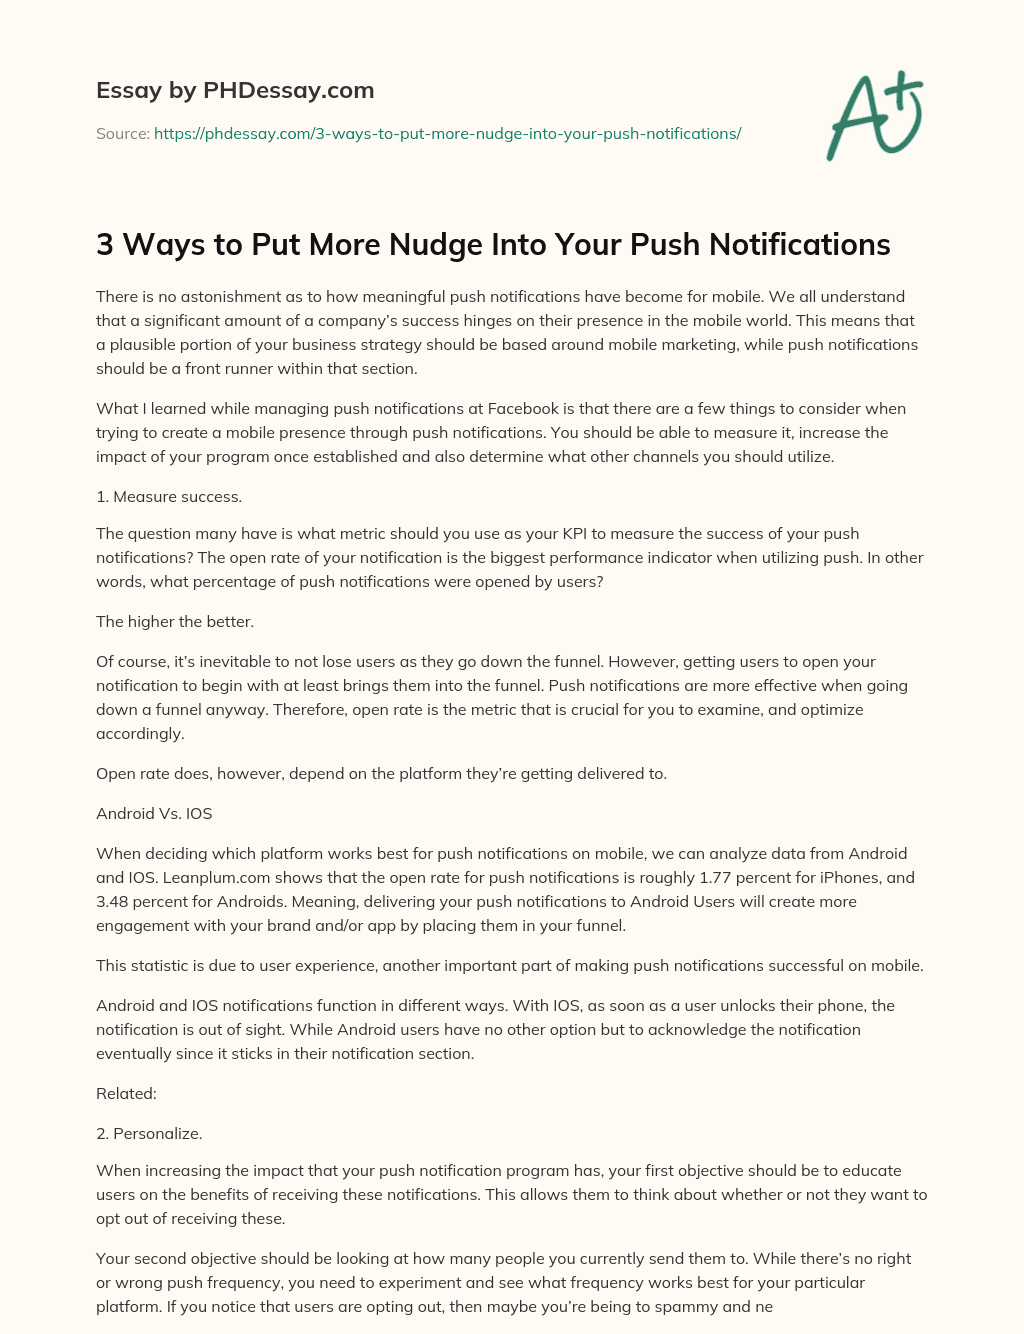 3 Ways to Put More Nudge Into Your Push Notifications essay